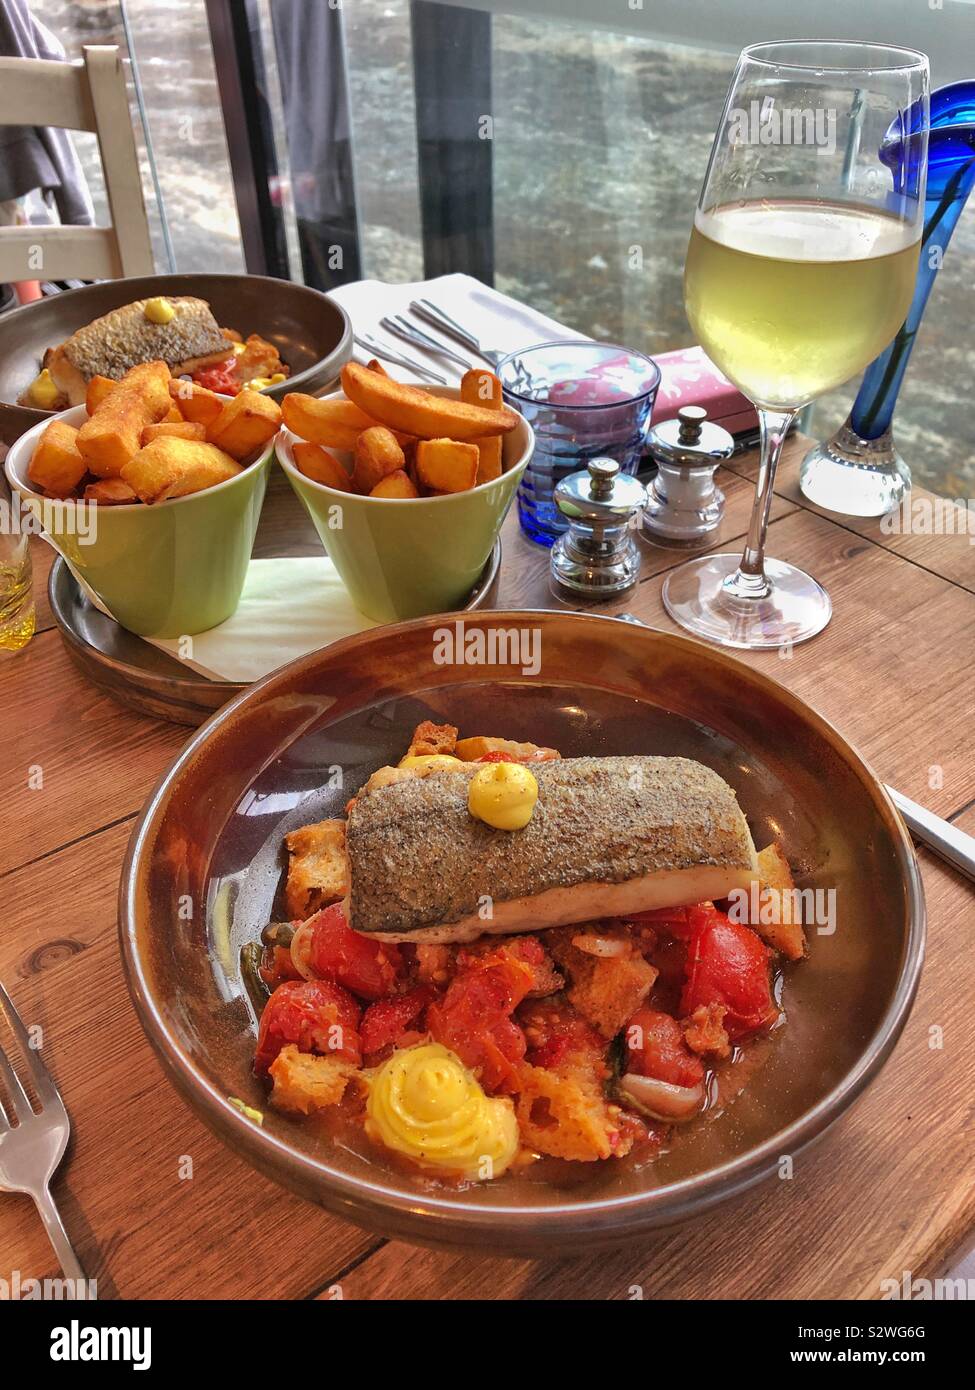 Salted hake, panzanella salad and fries with a cold glass of Chardonnay. Stock Photo